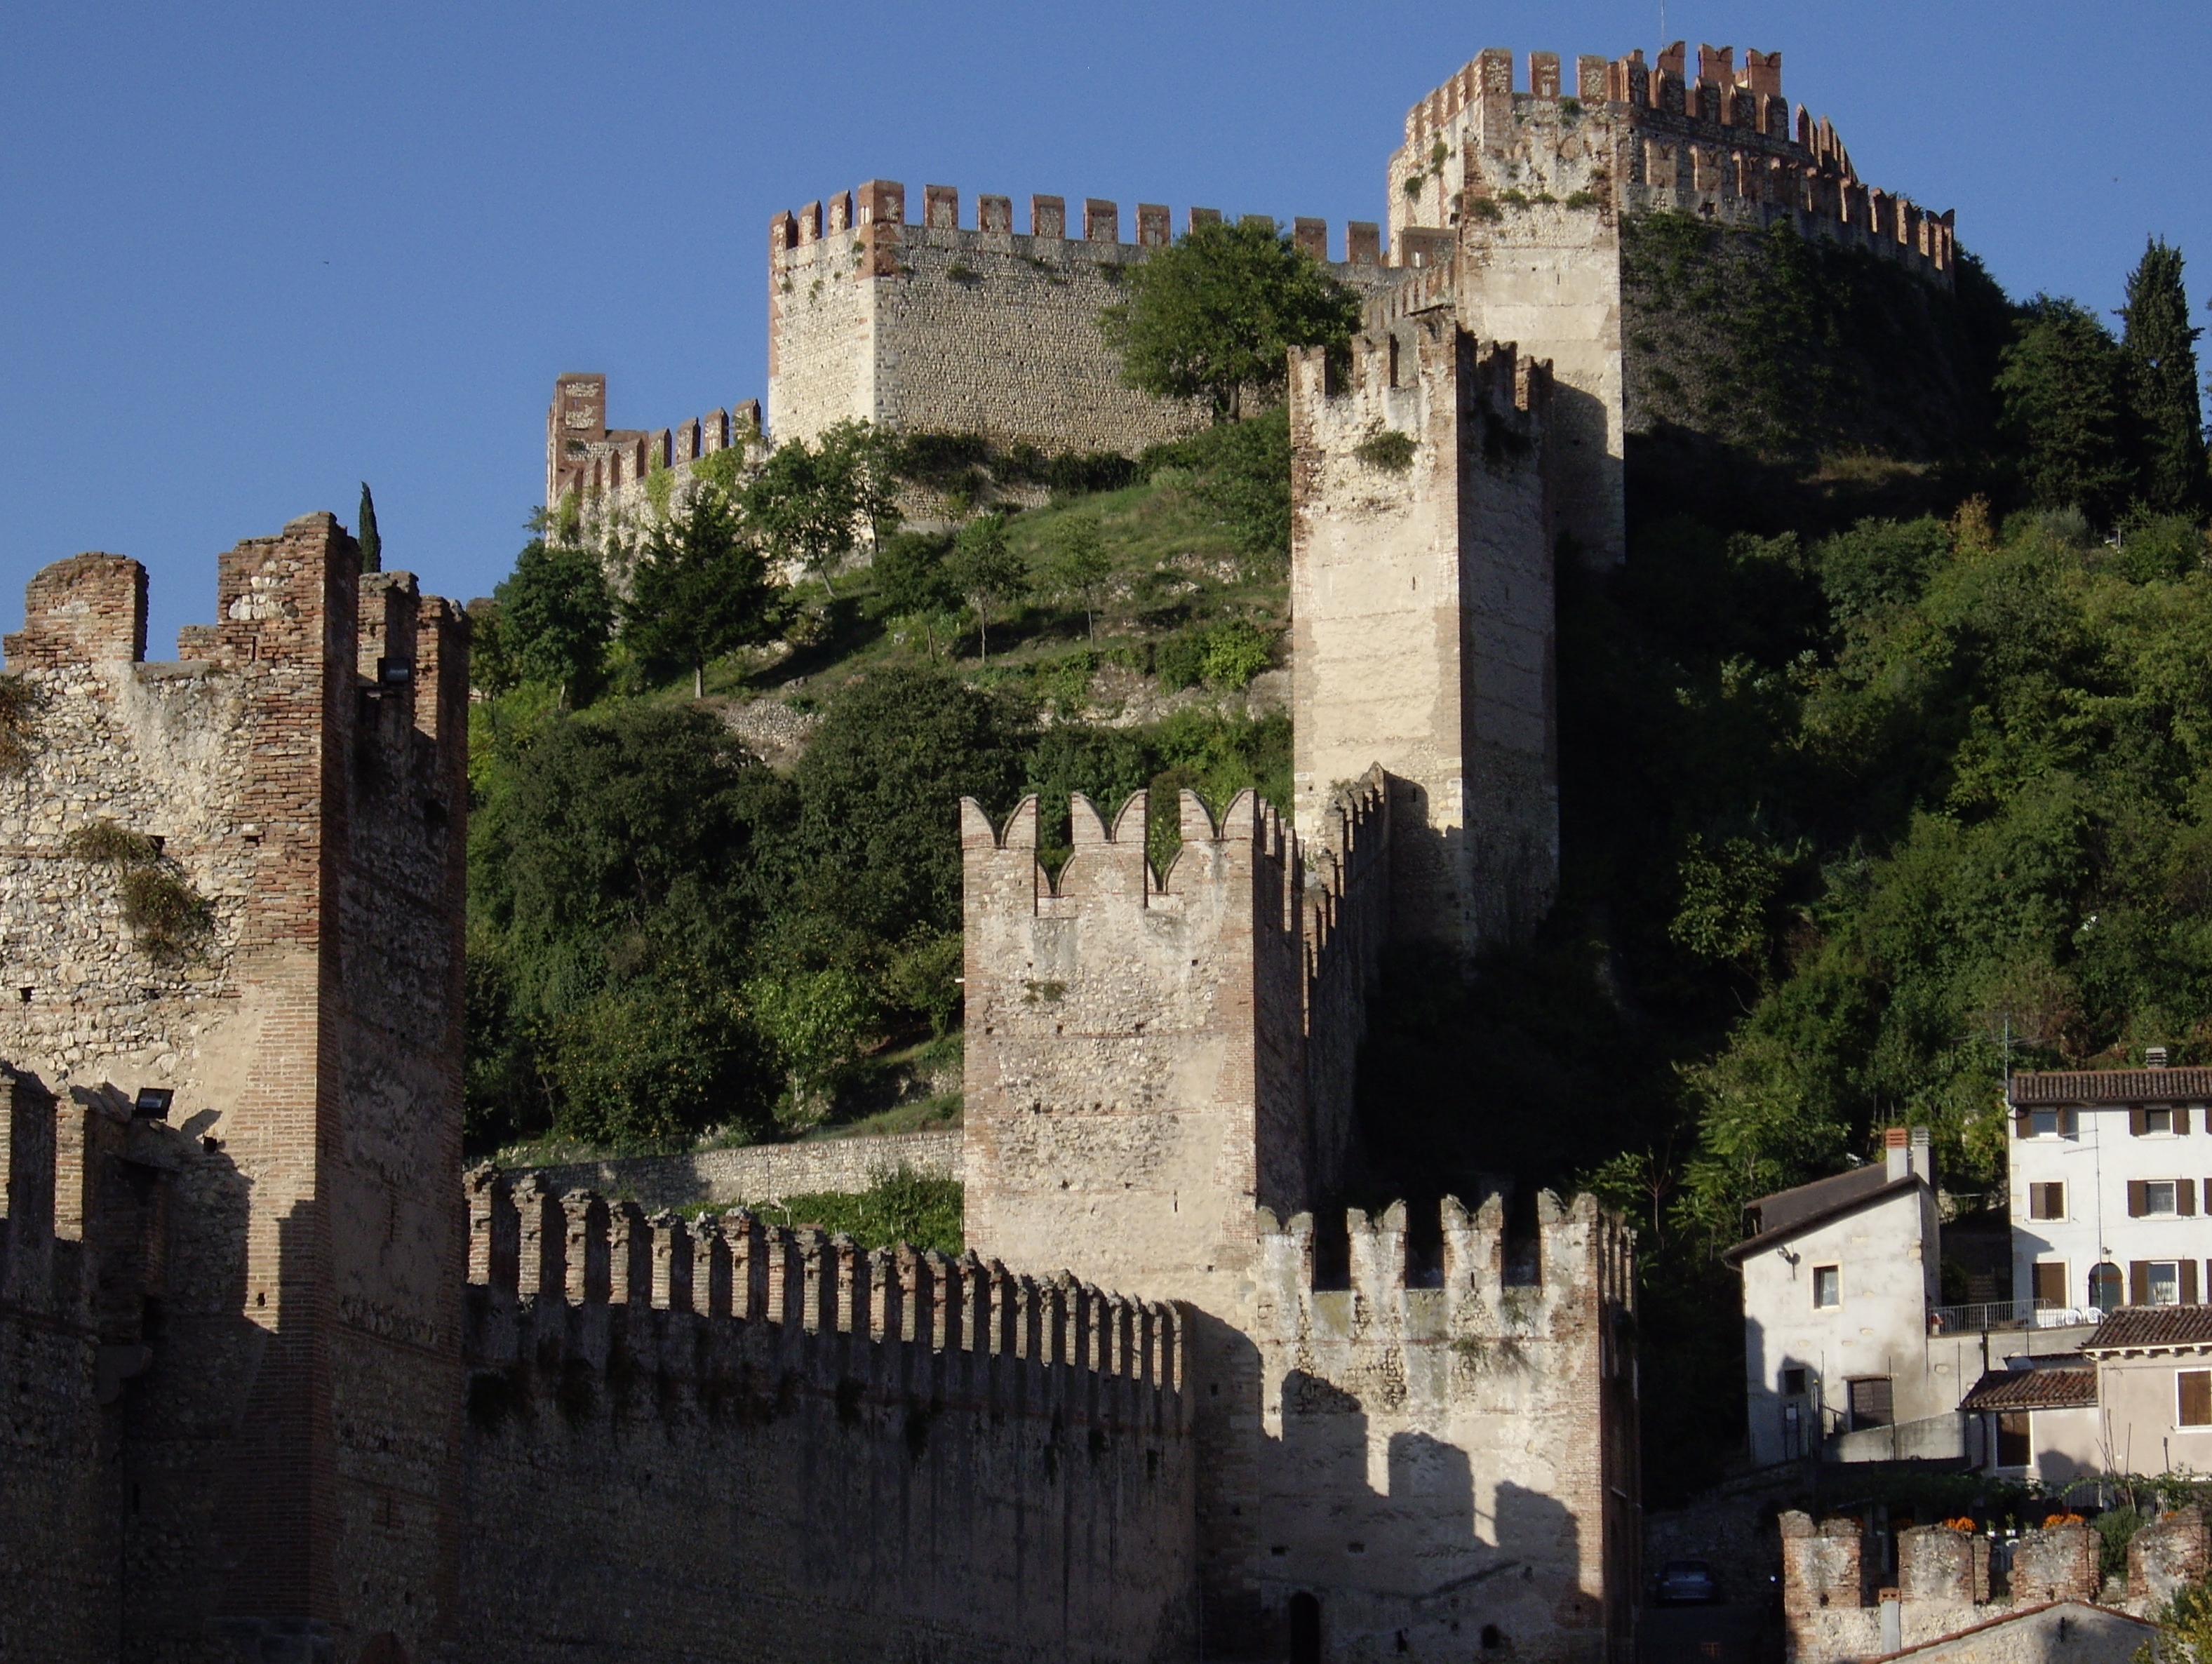 Walls and Castle of Soave